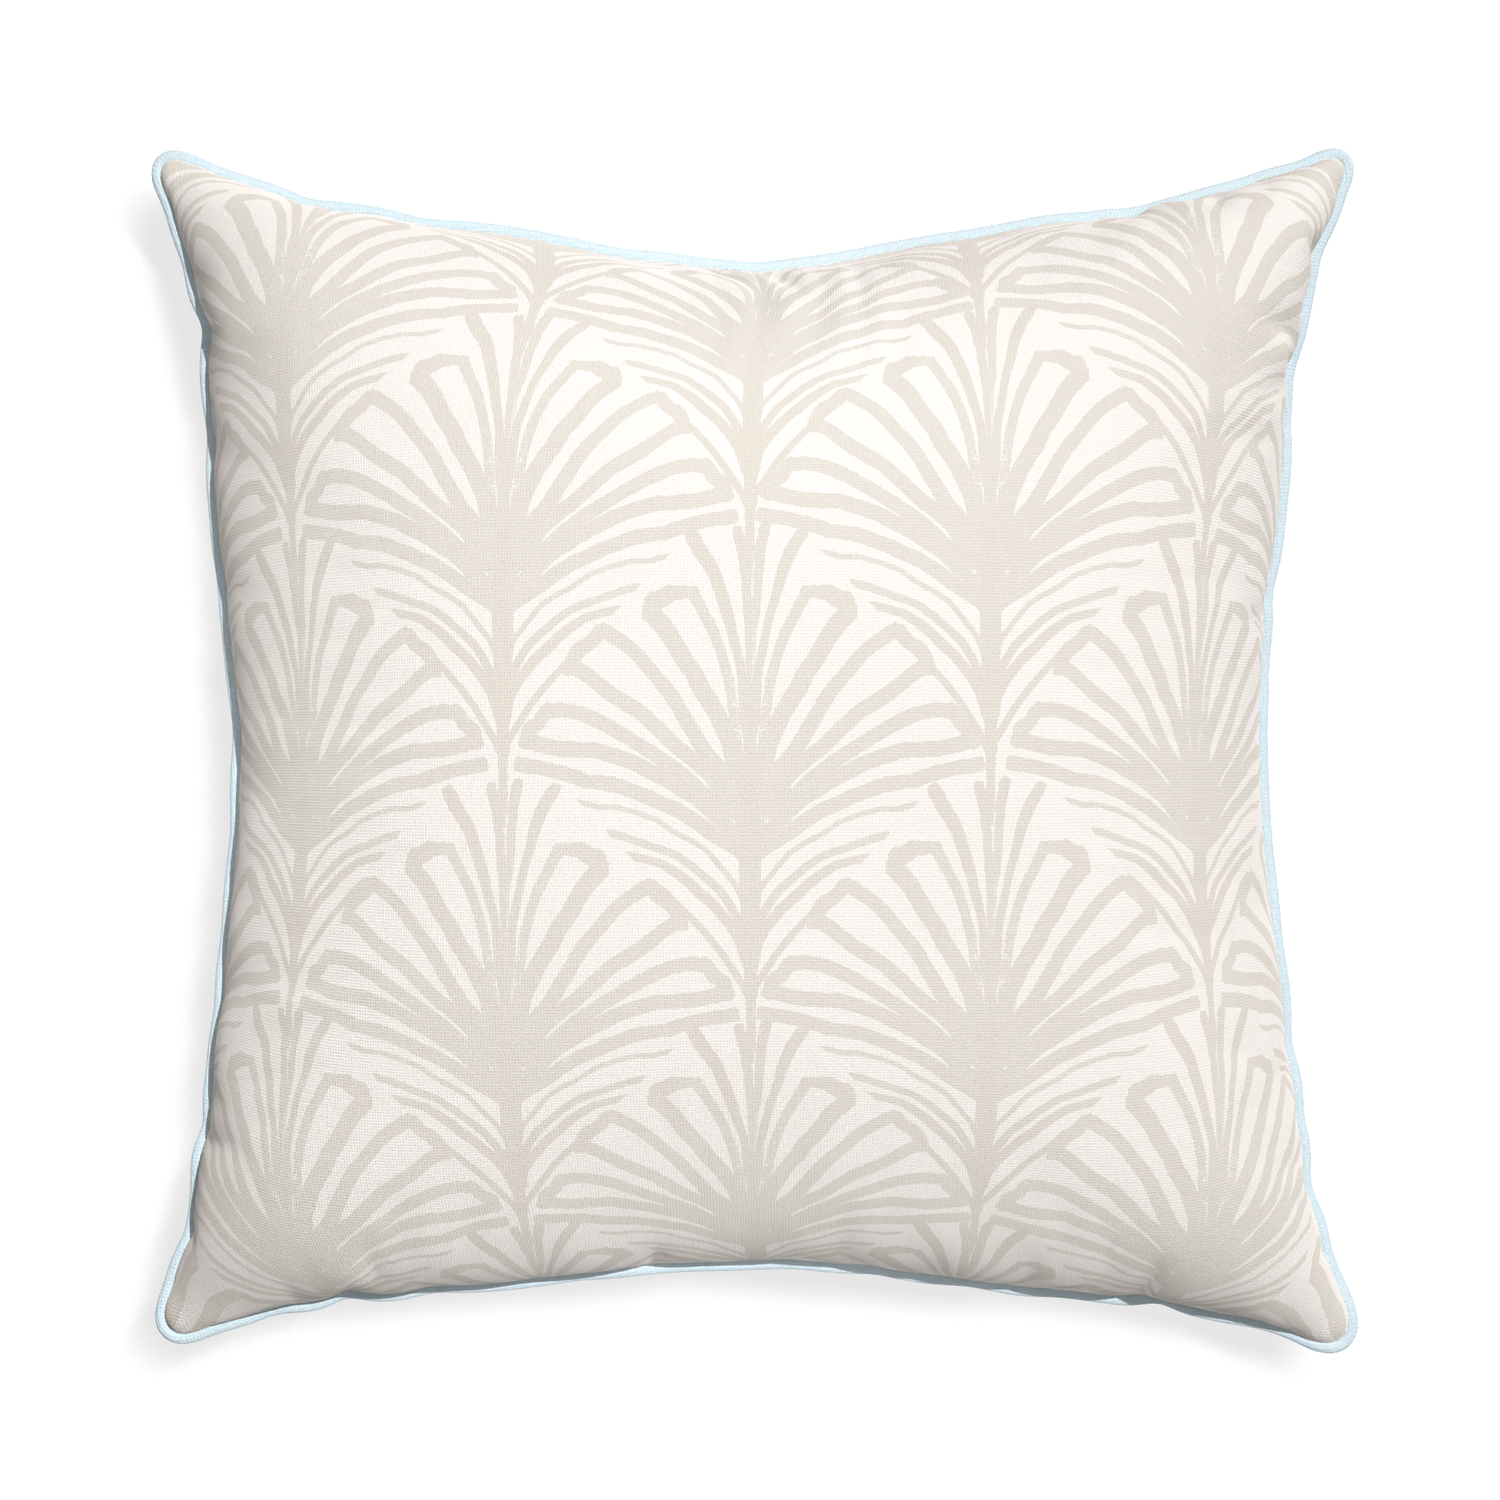 Euro-sham suzy sand custom pillow with powder piping on white background